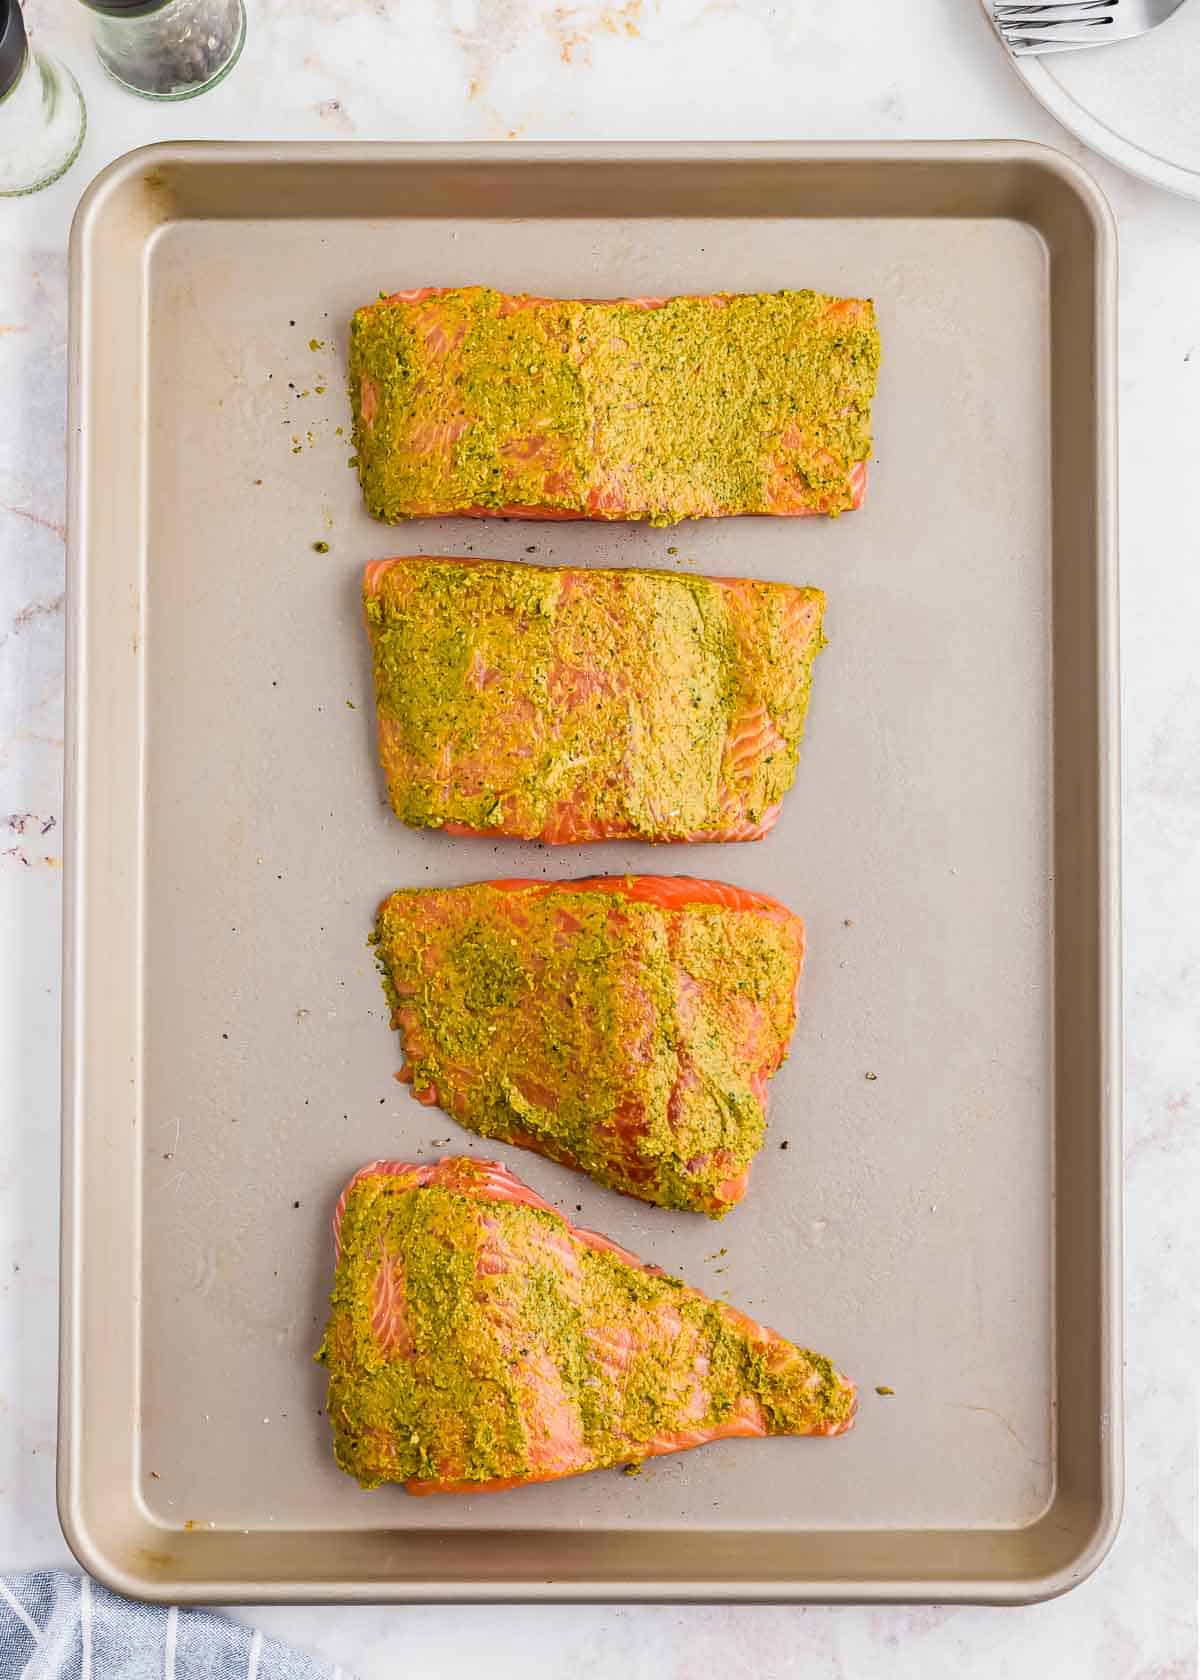 Salmon filets on a baking sheet with pesto spread on top of each.